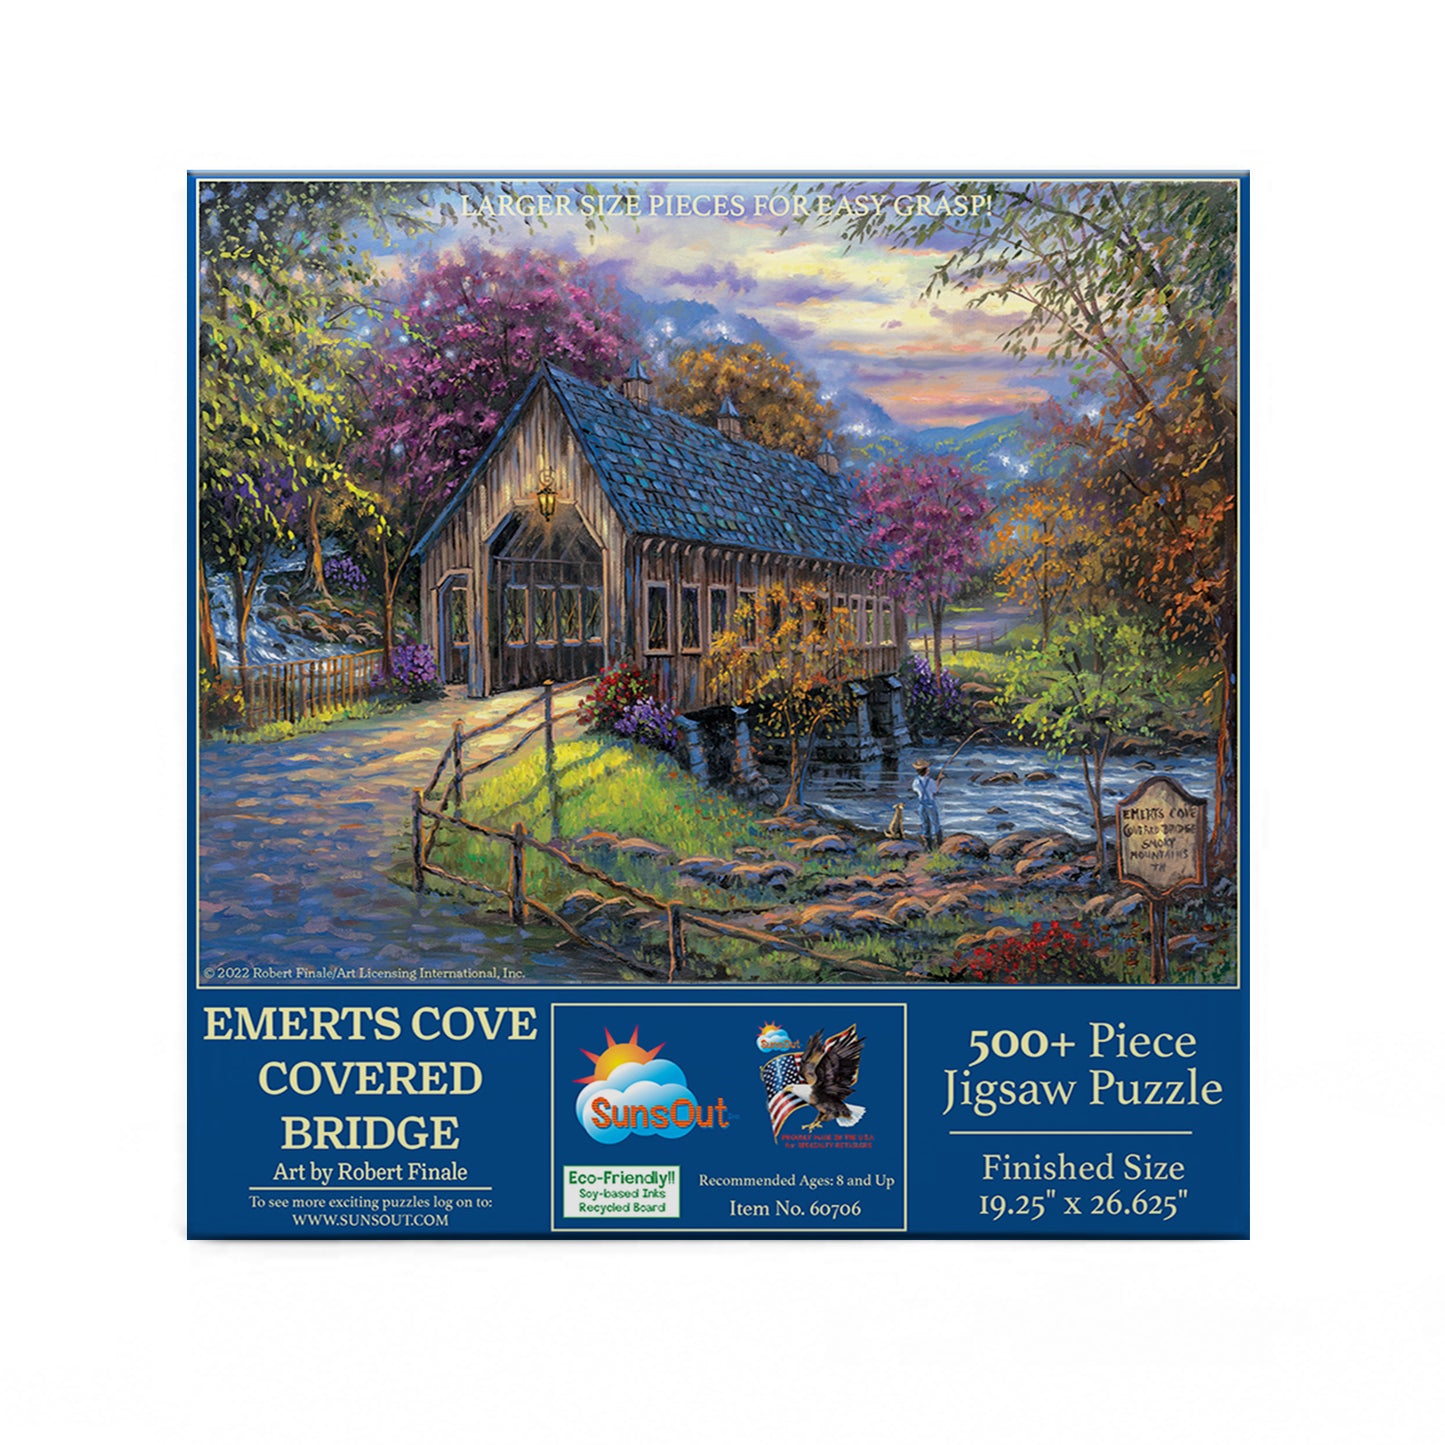 Emerts Cove Covered Bridge - 500 Large Piece Jigsaw Puzzle